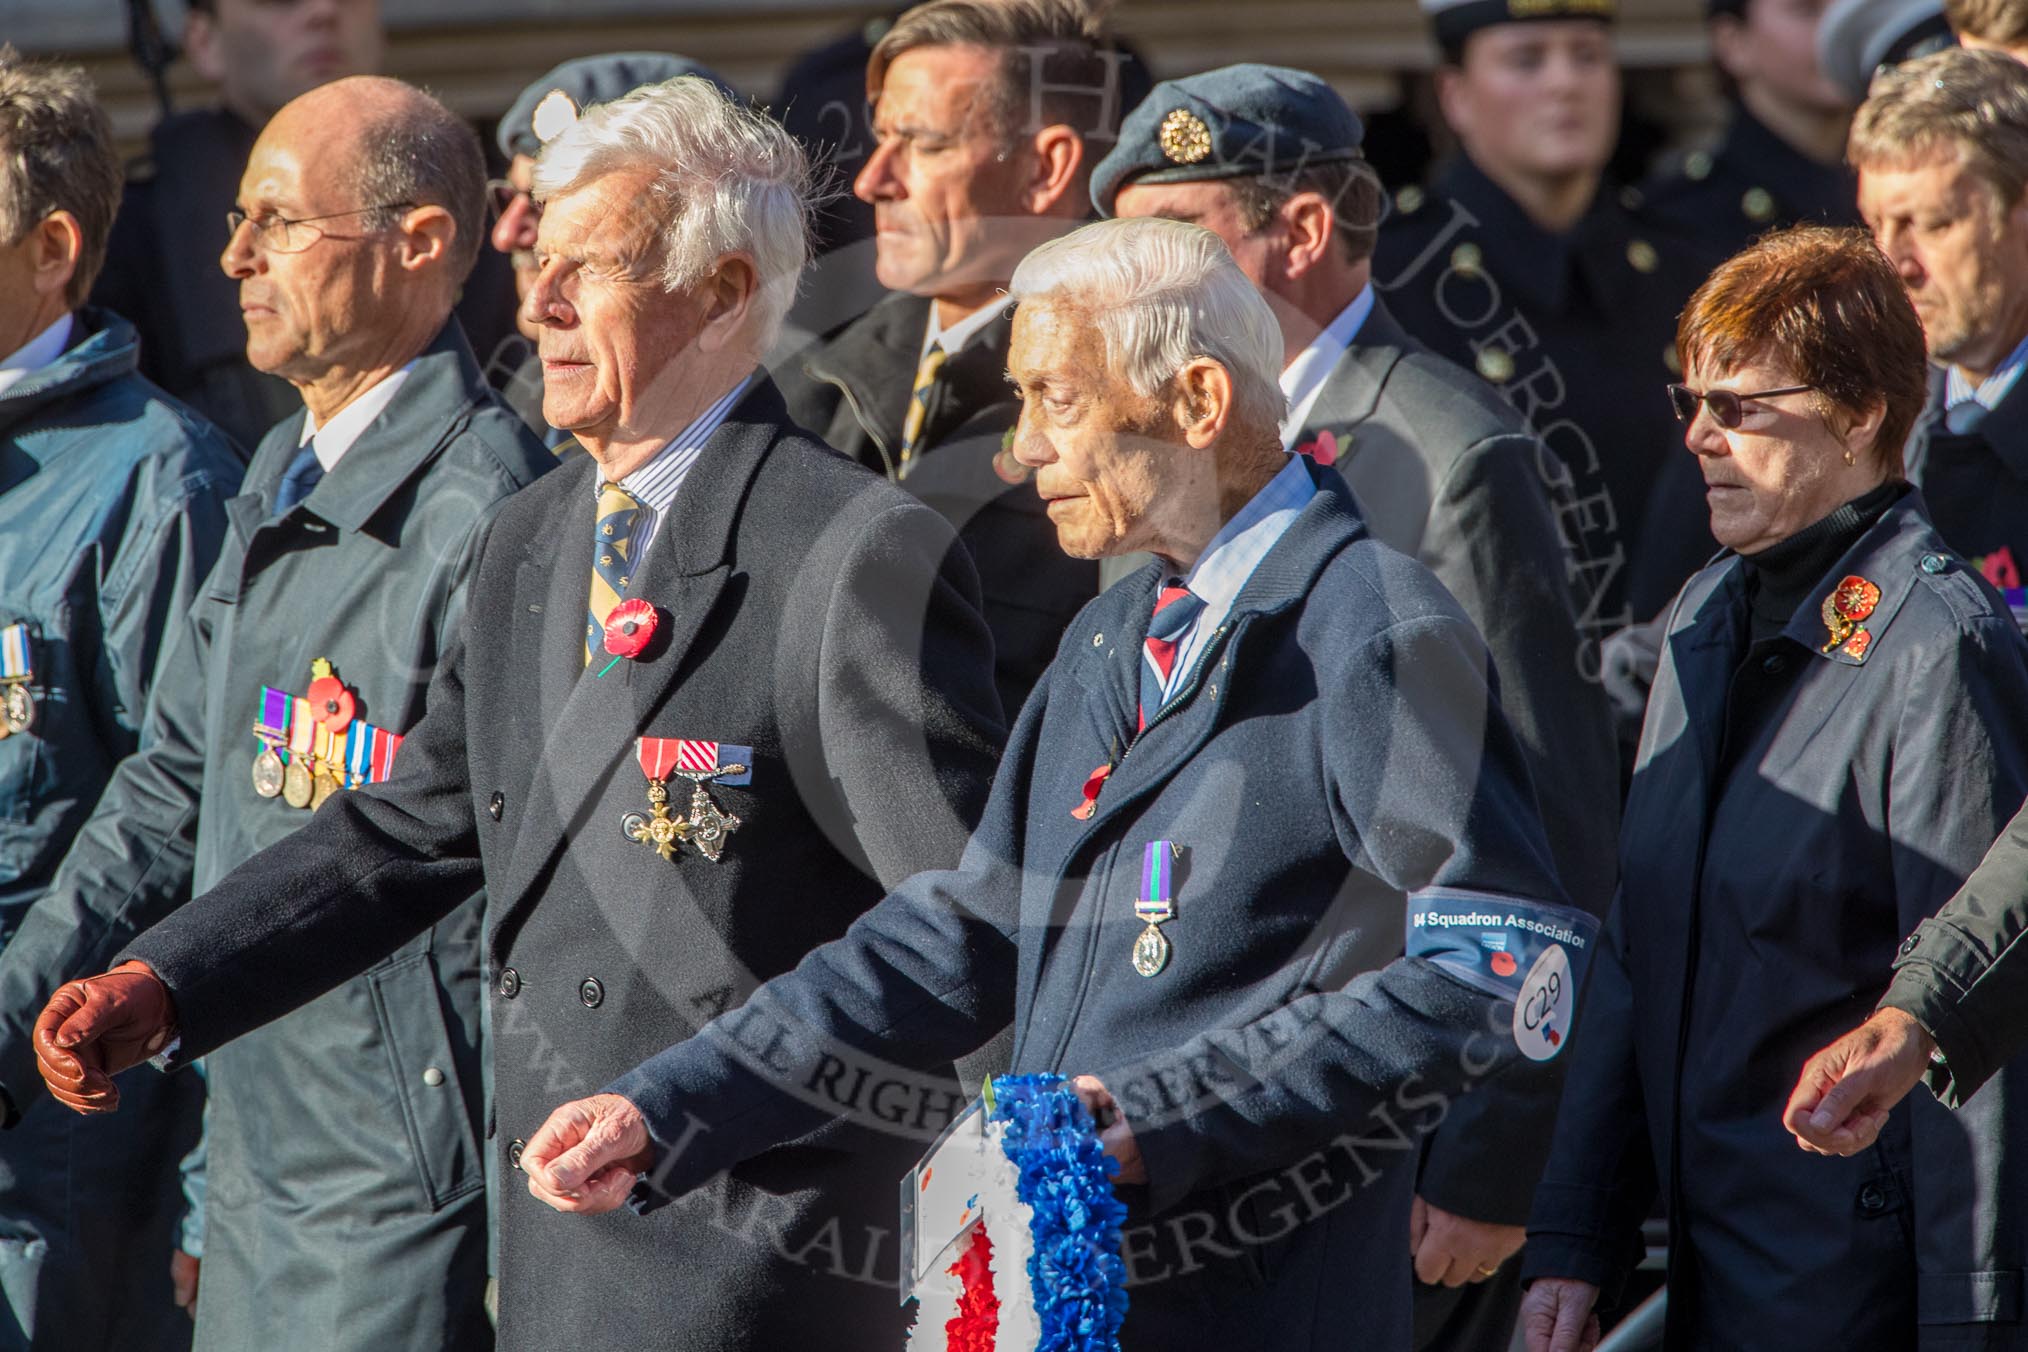 84 Squadron Association (Group C29, 15 members) during the Royal British Legion March Past on Remembrance Sunday at the Cenotaph, Whitehall, Westminster, London, 11 November 2018, 12:19.